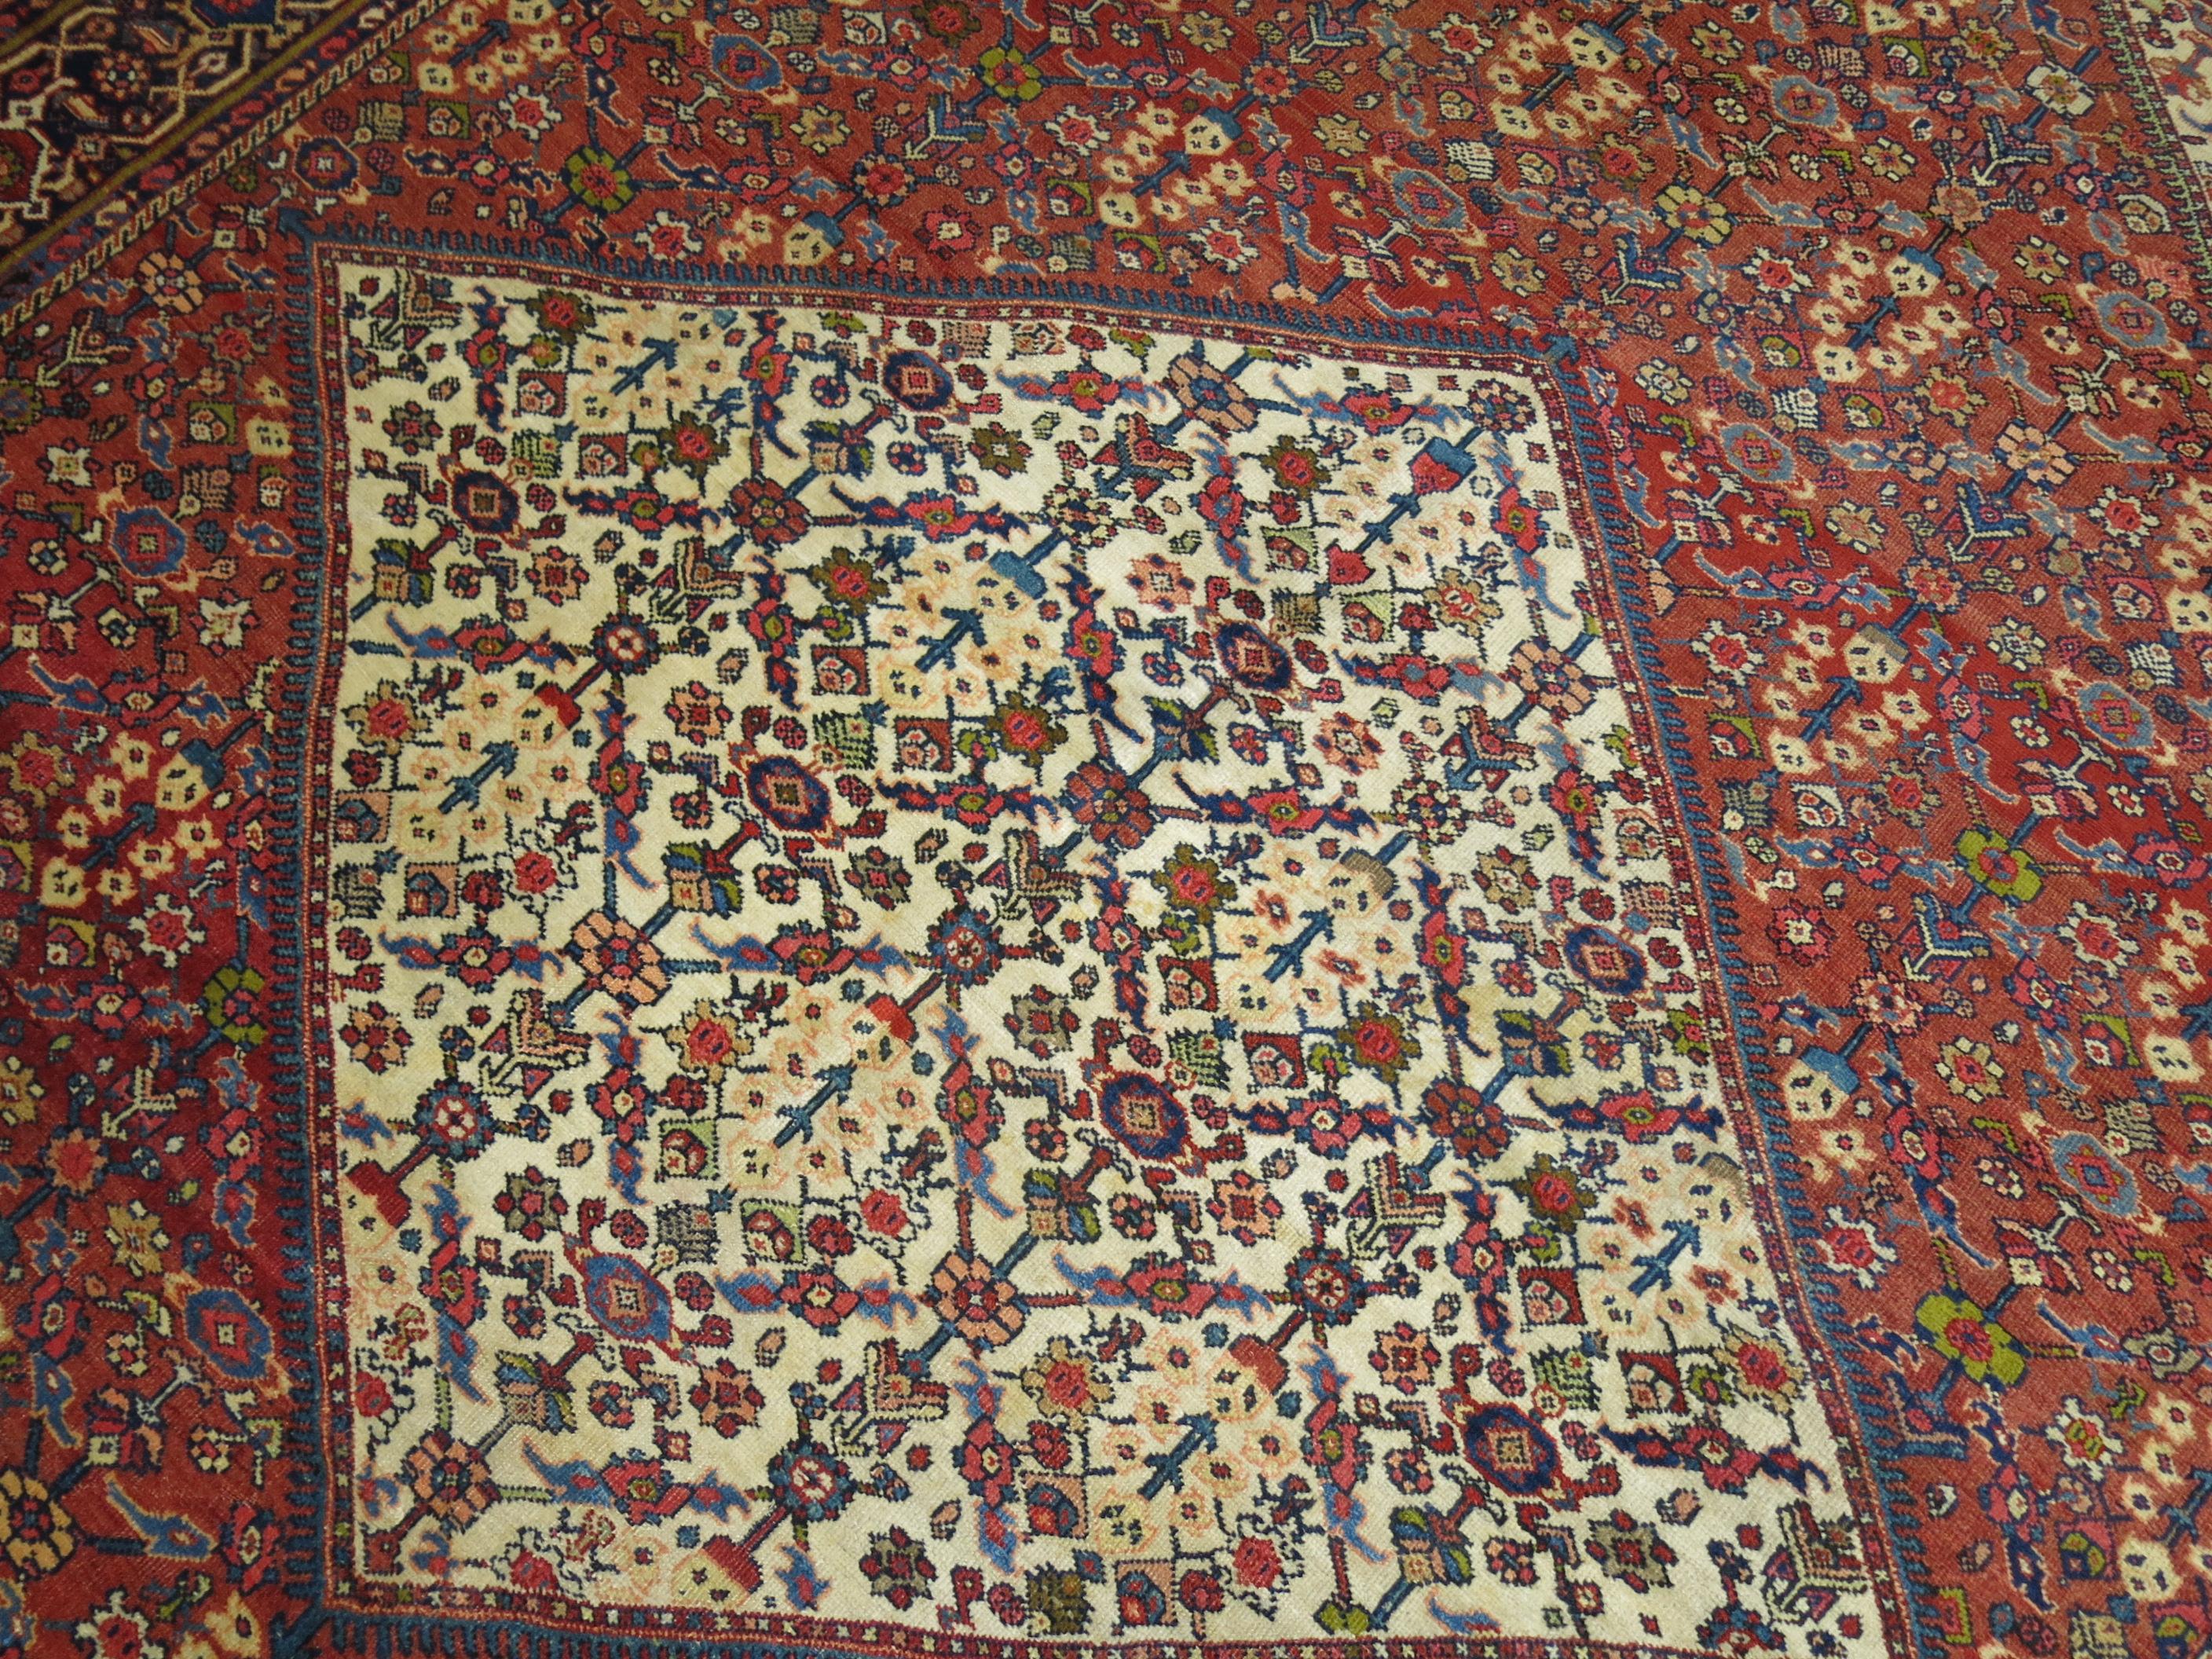 An authentic handmade one-of-a-kind Persian Sultanabad rug with a large-scale masculine geometric design.

9'4'' x 12'6''